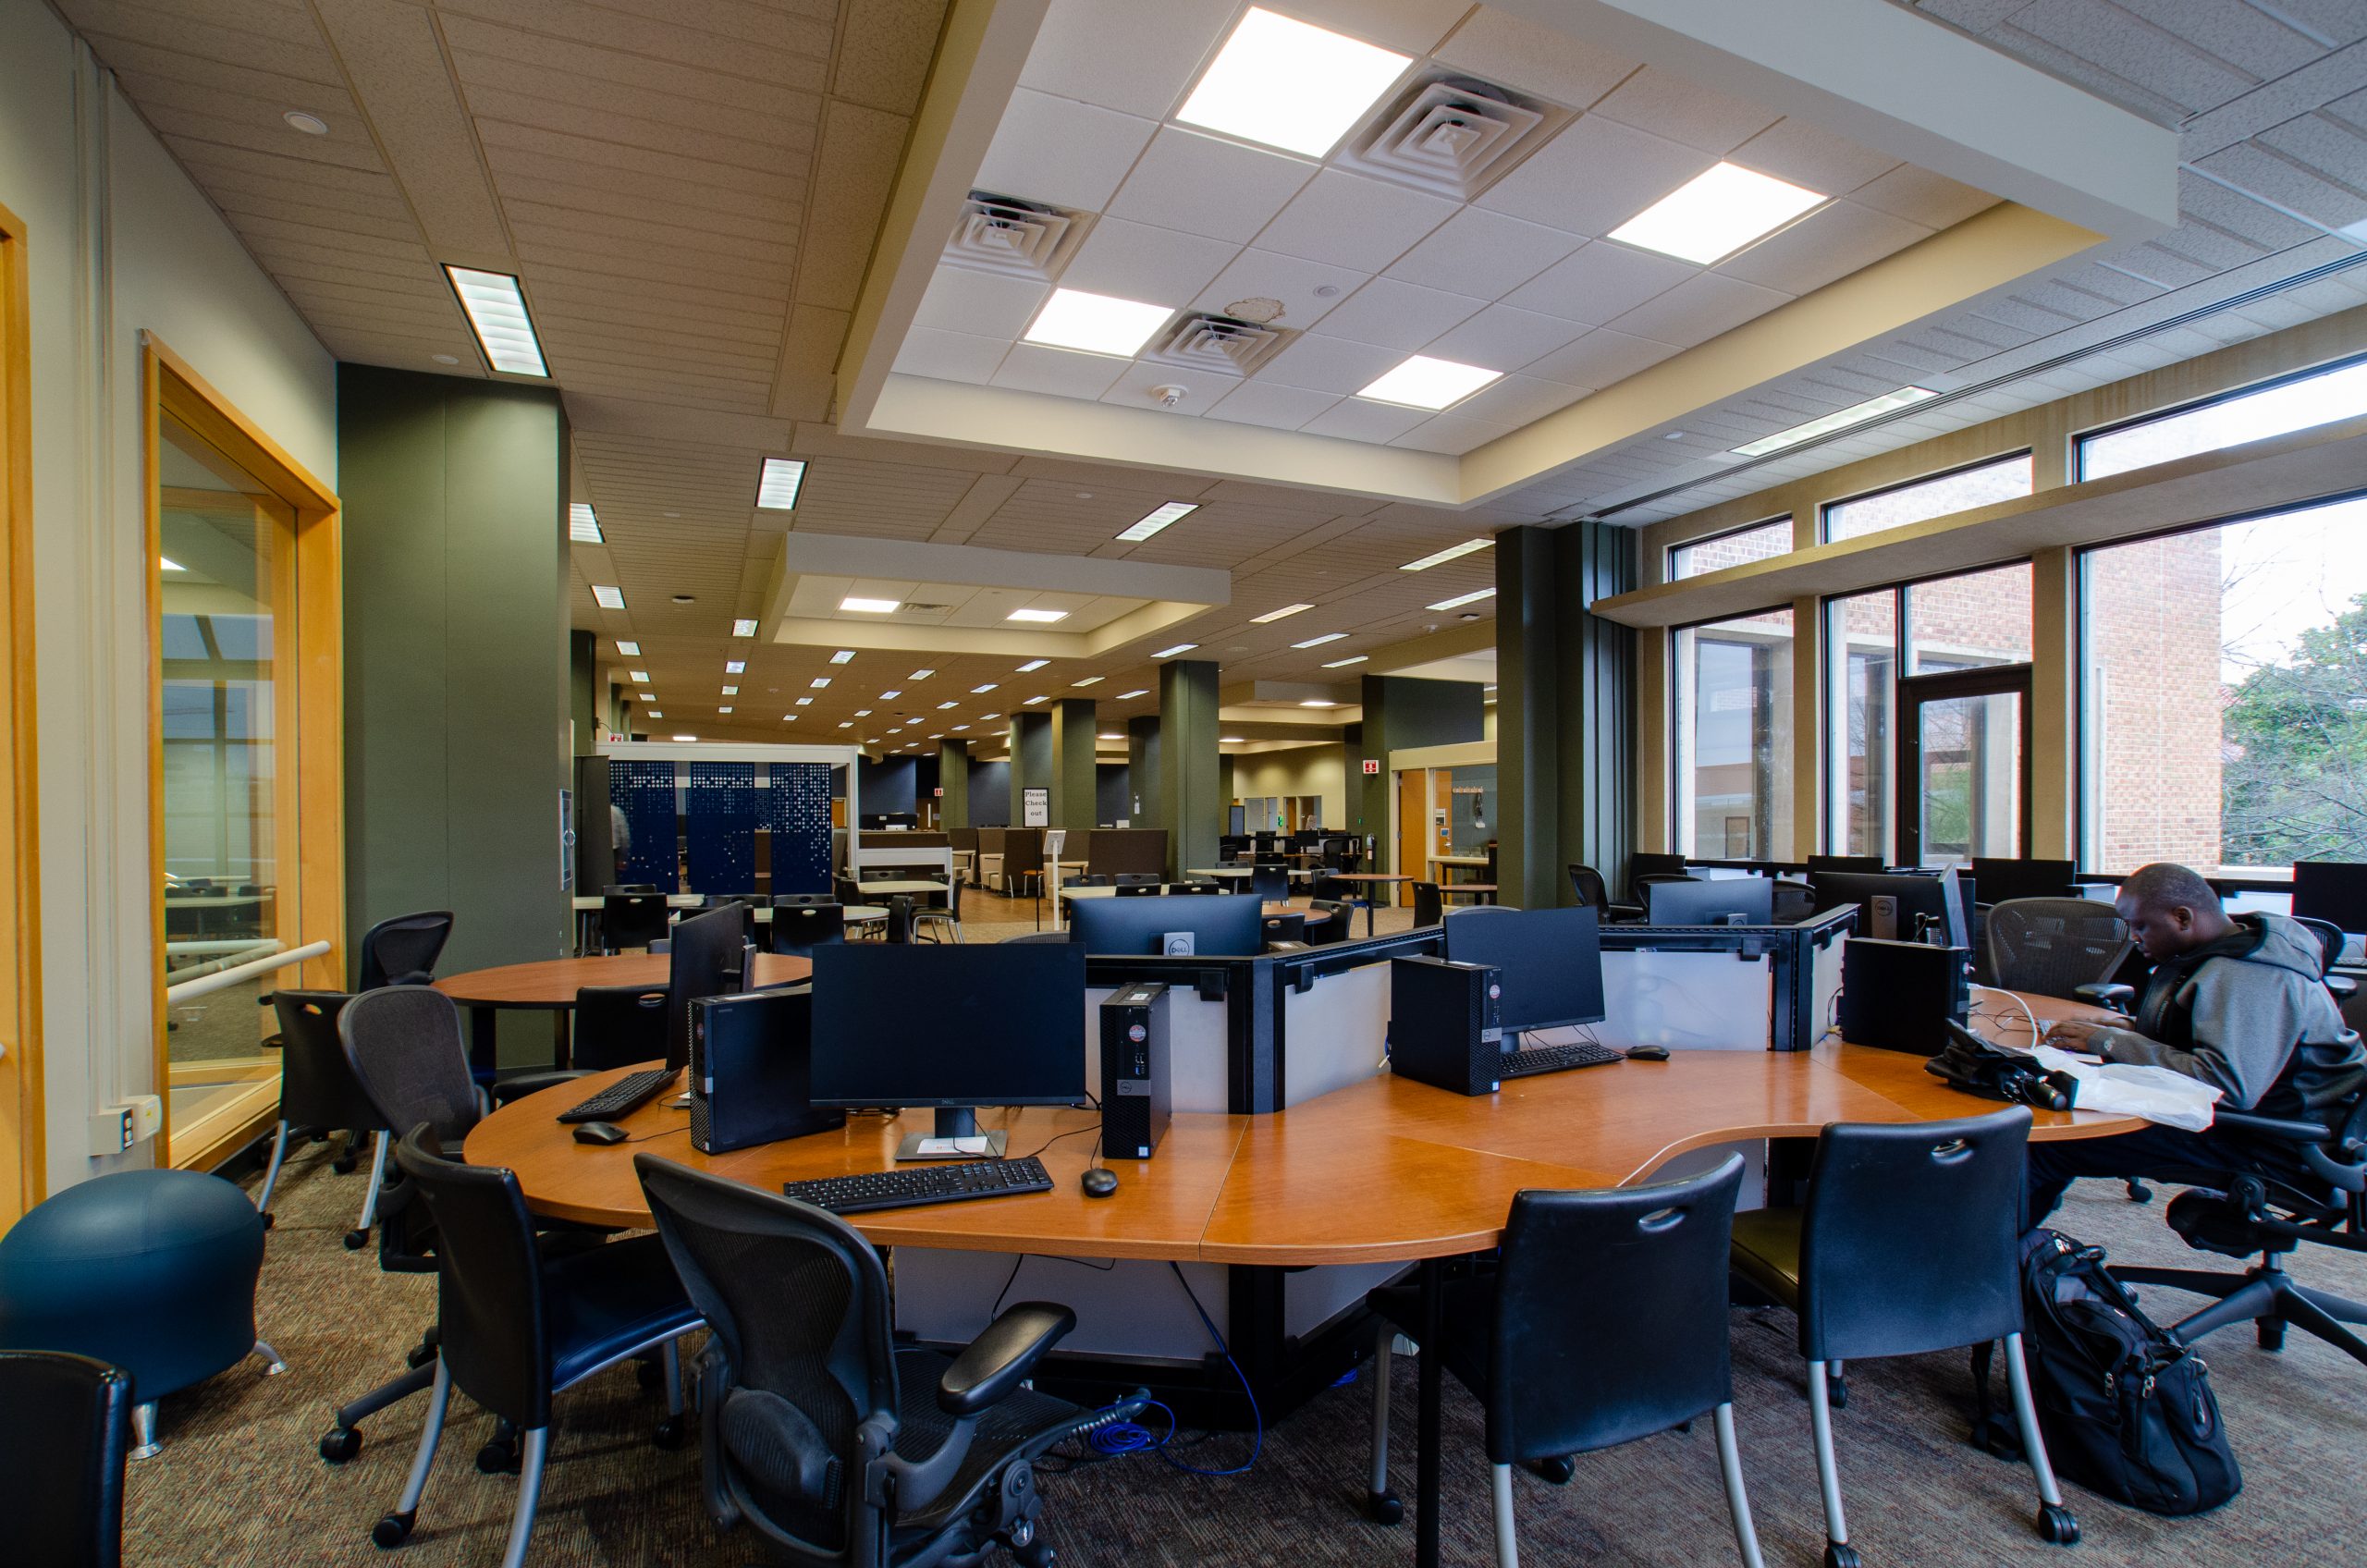 commons north in hodges library at university of tennesee knoxville